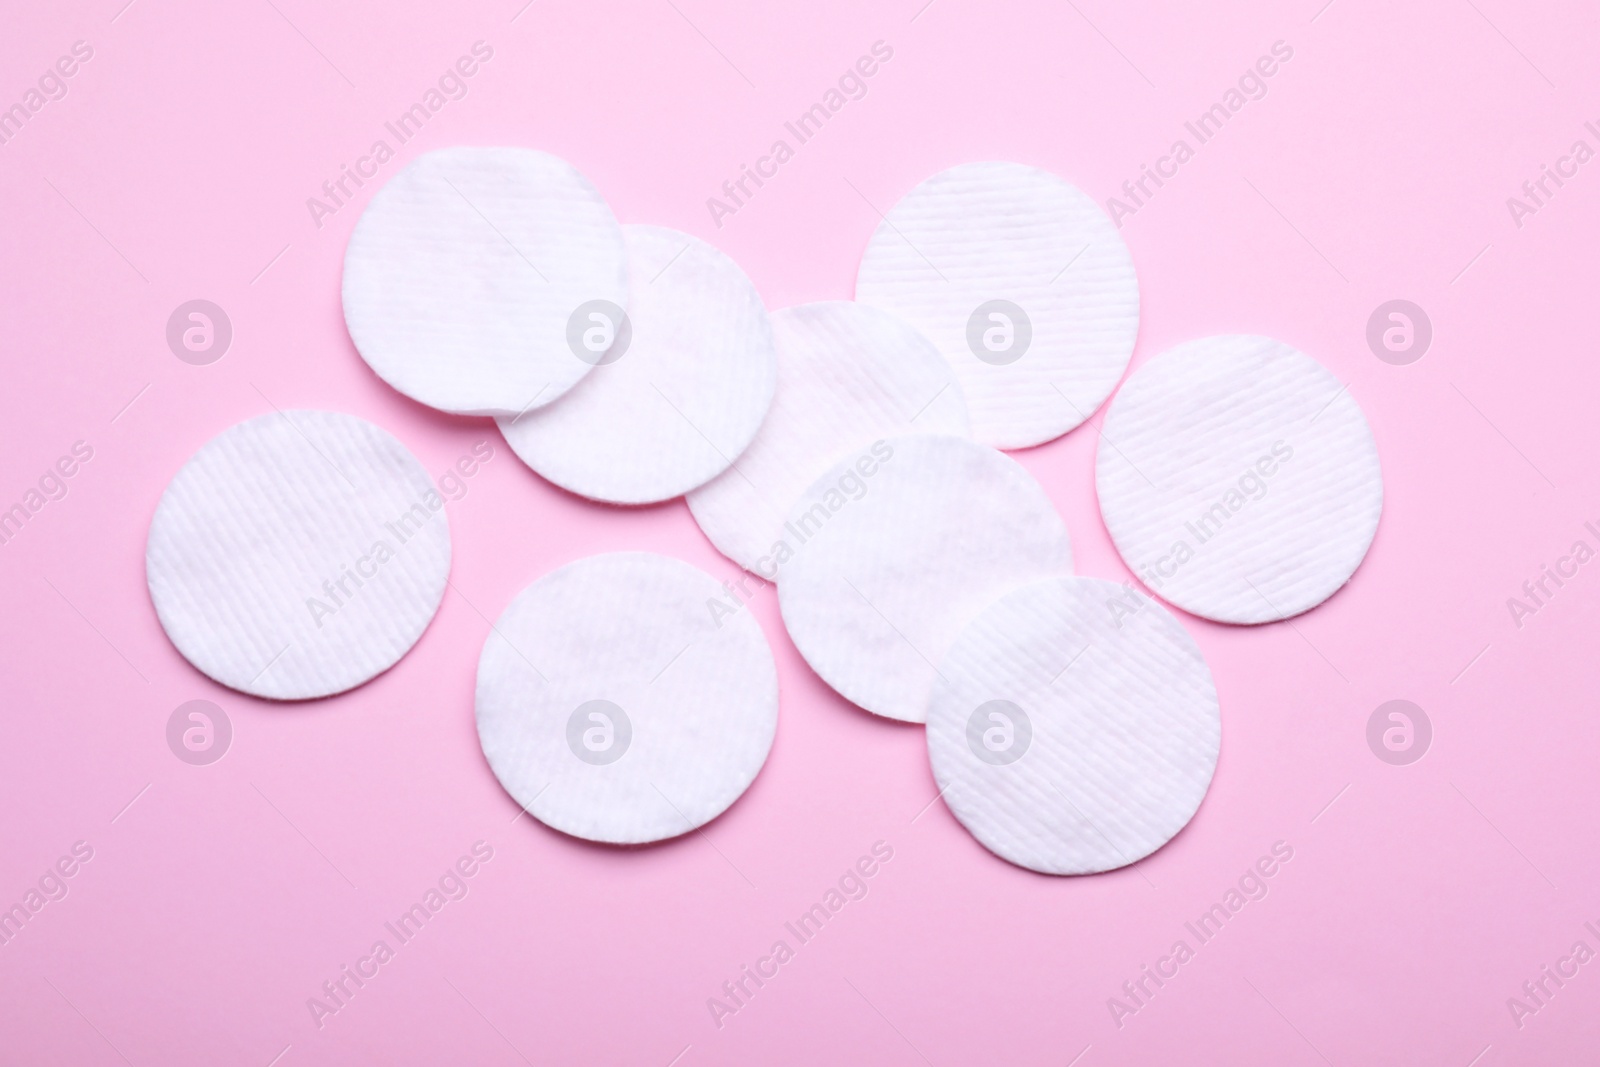 Photo of Soft clean cotton pads on pink background, flat lay